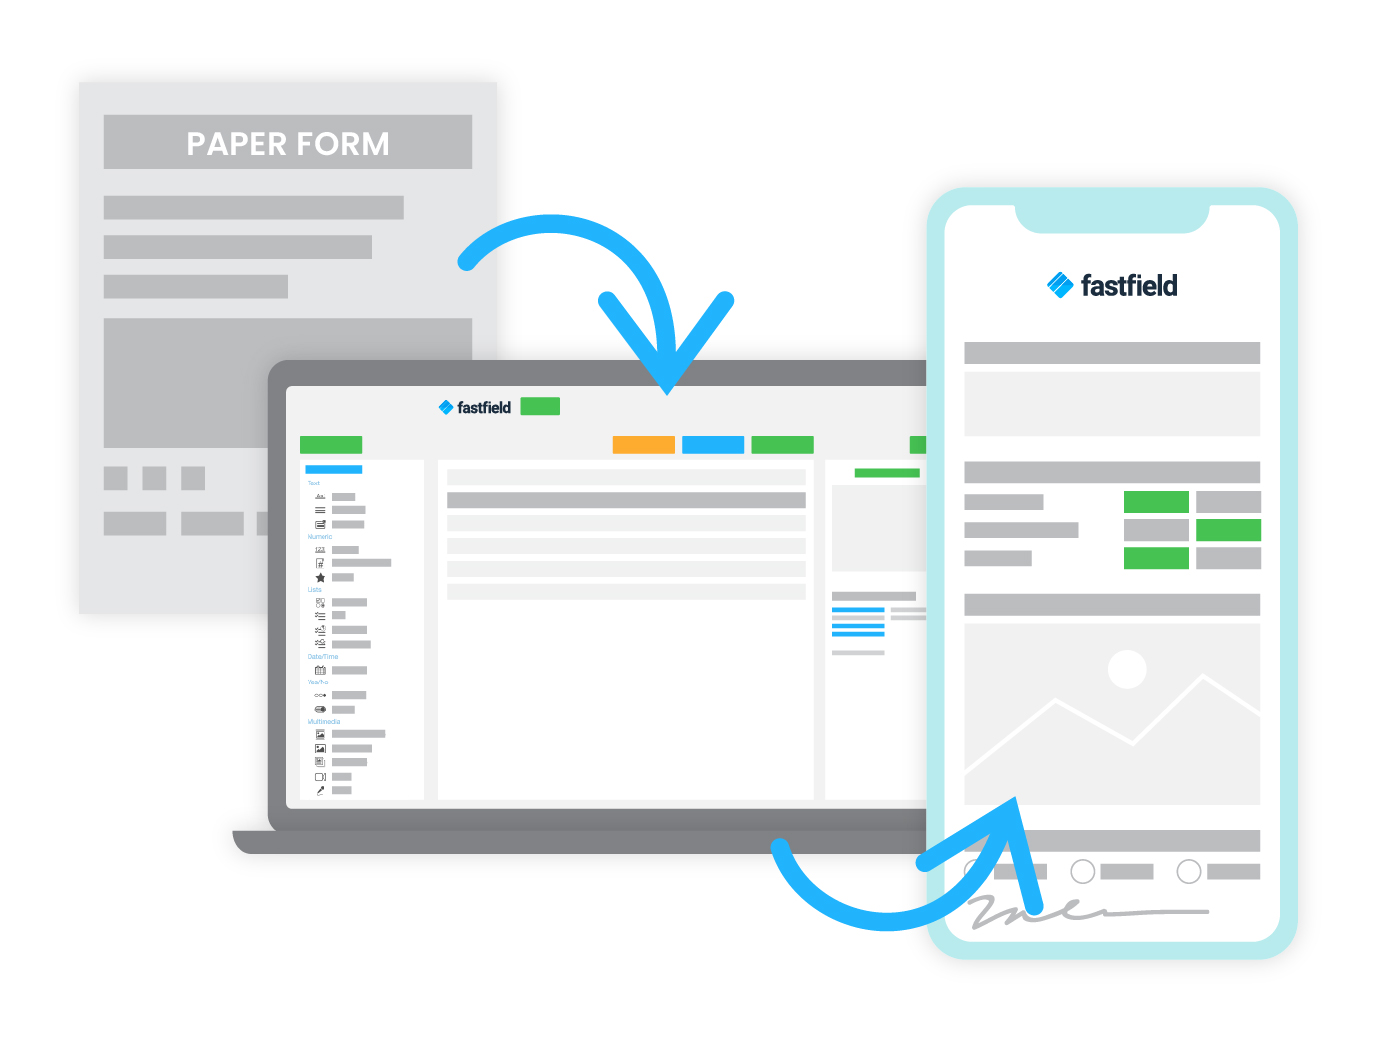 Paper Forms to Web App to Mobile App